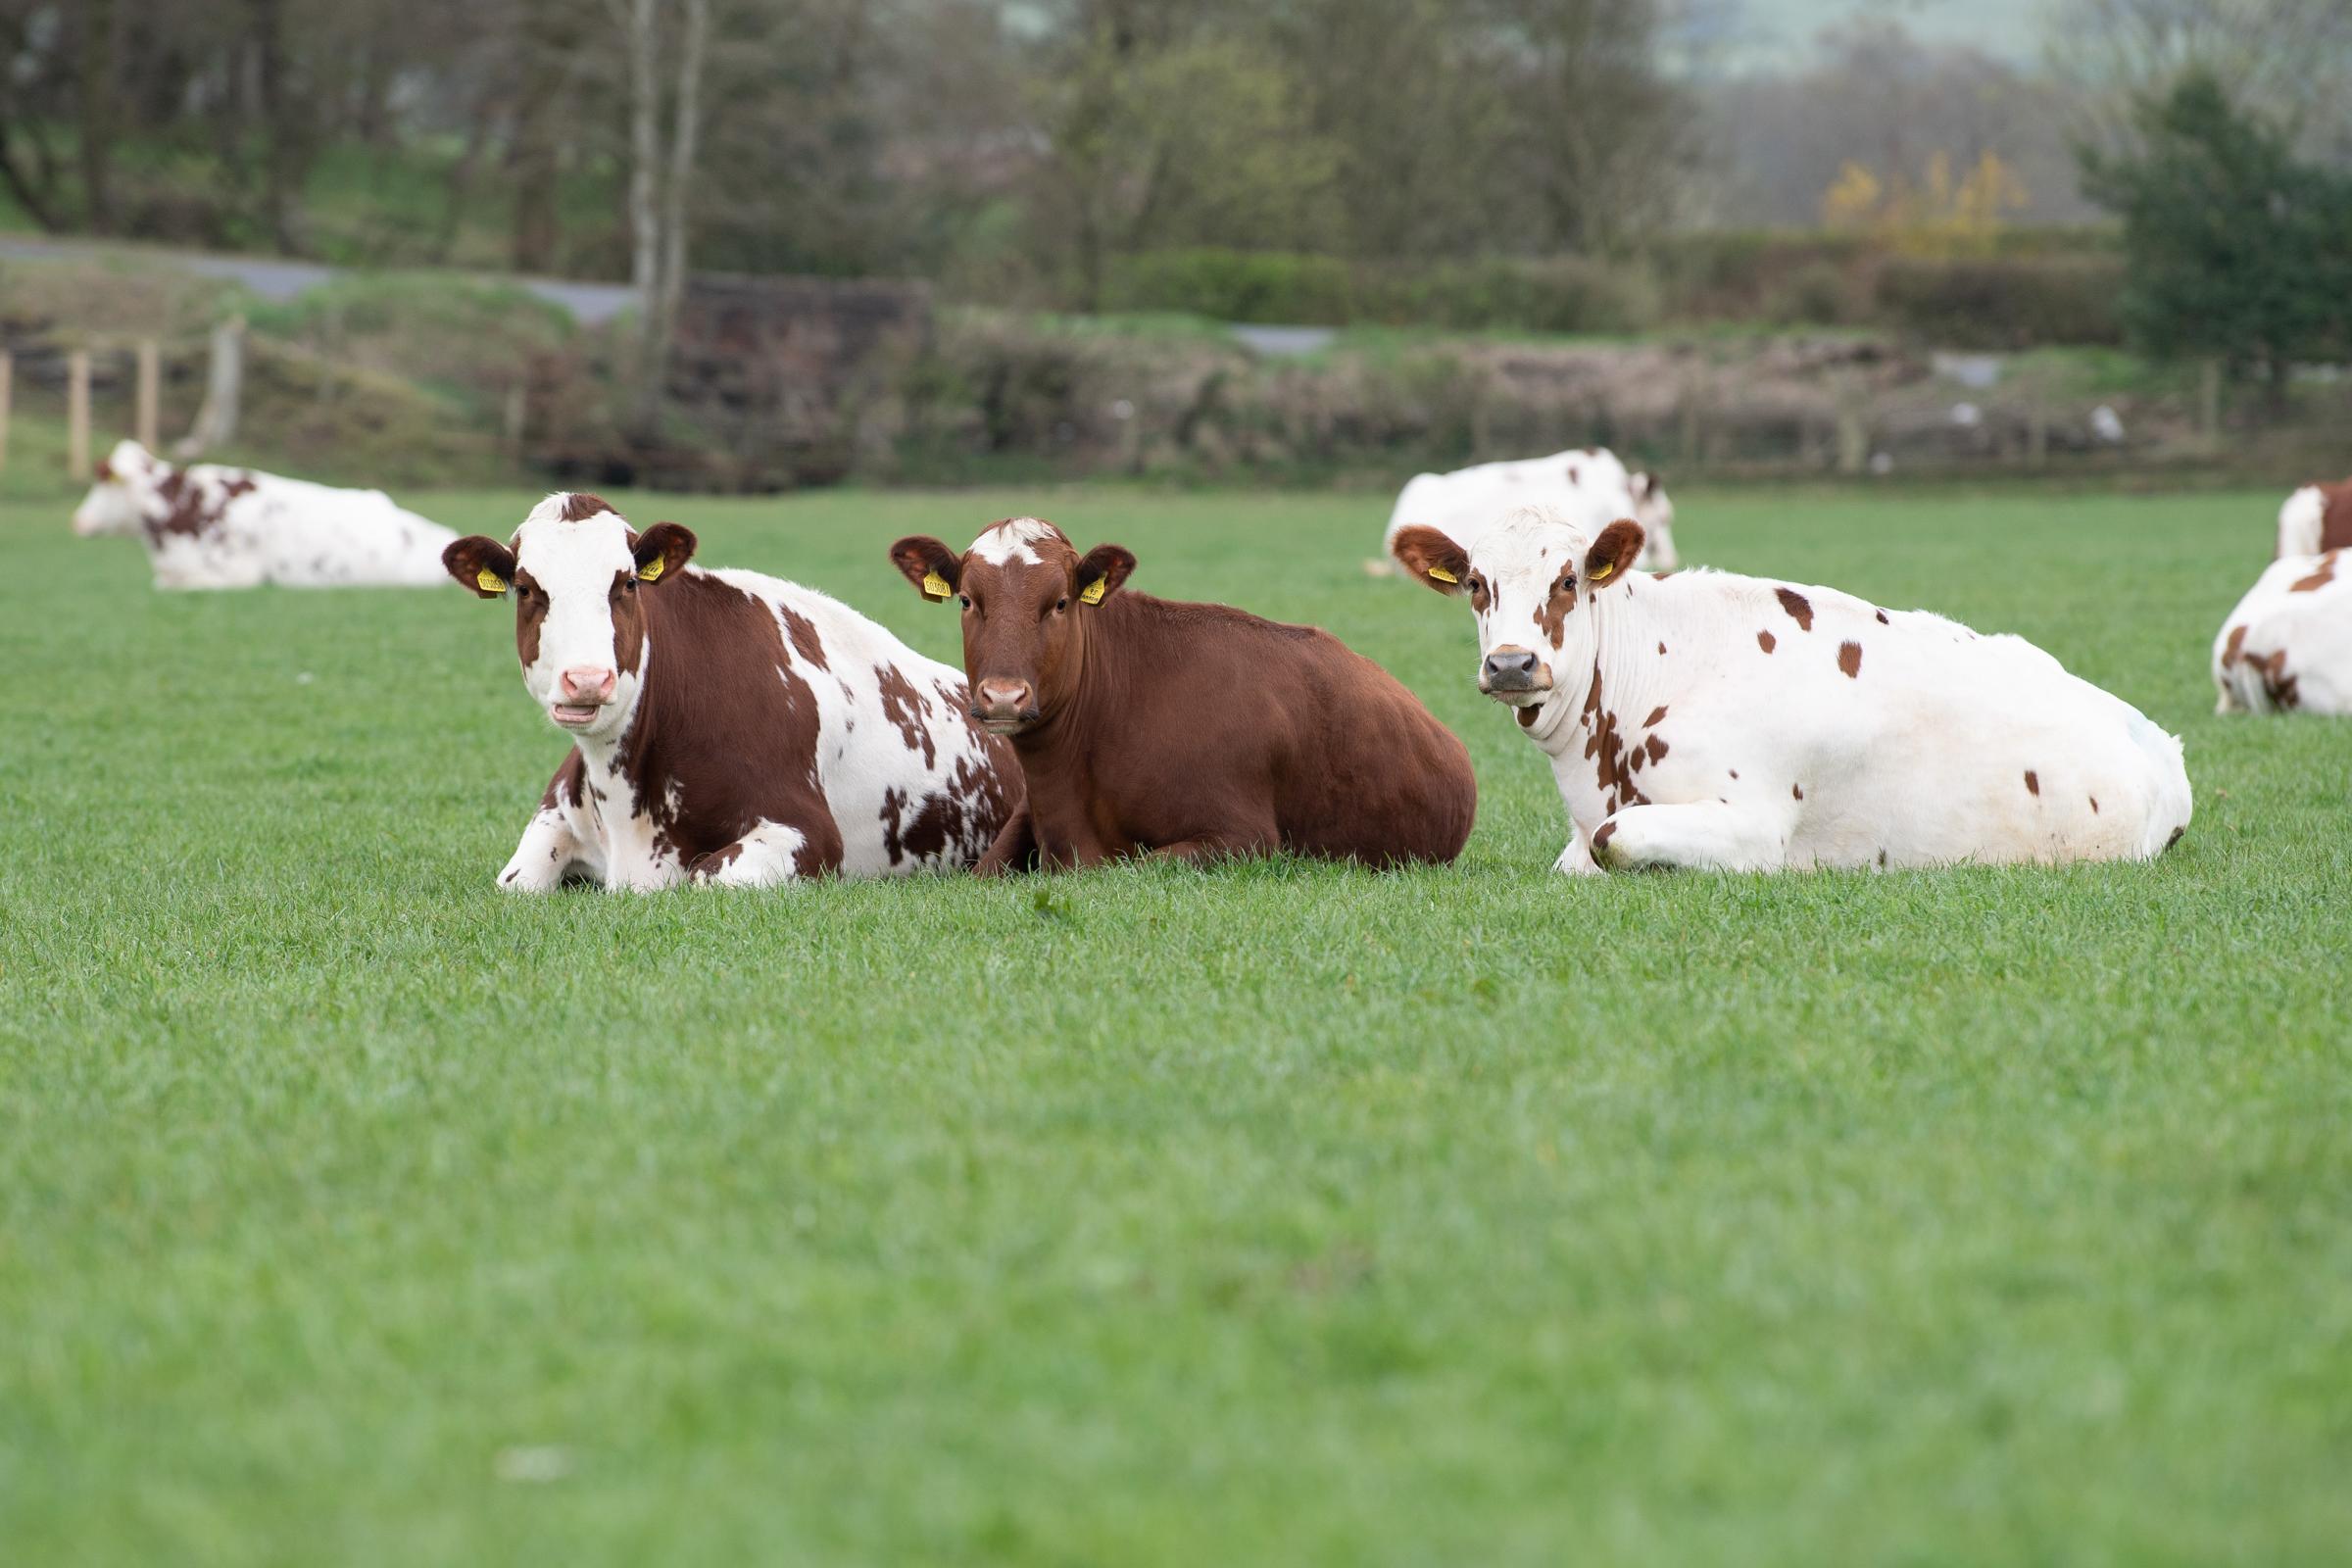 18 month in-calf heifers out at grass, due to calve at 24 months Ref:RH260421333 Rob Haining / The Scottish Farmer...